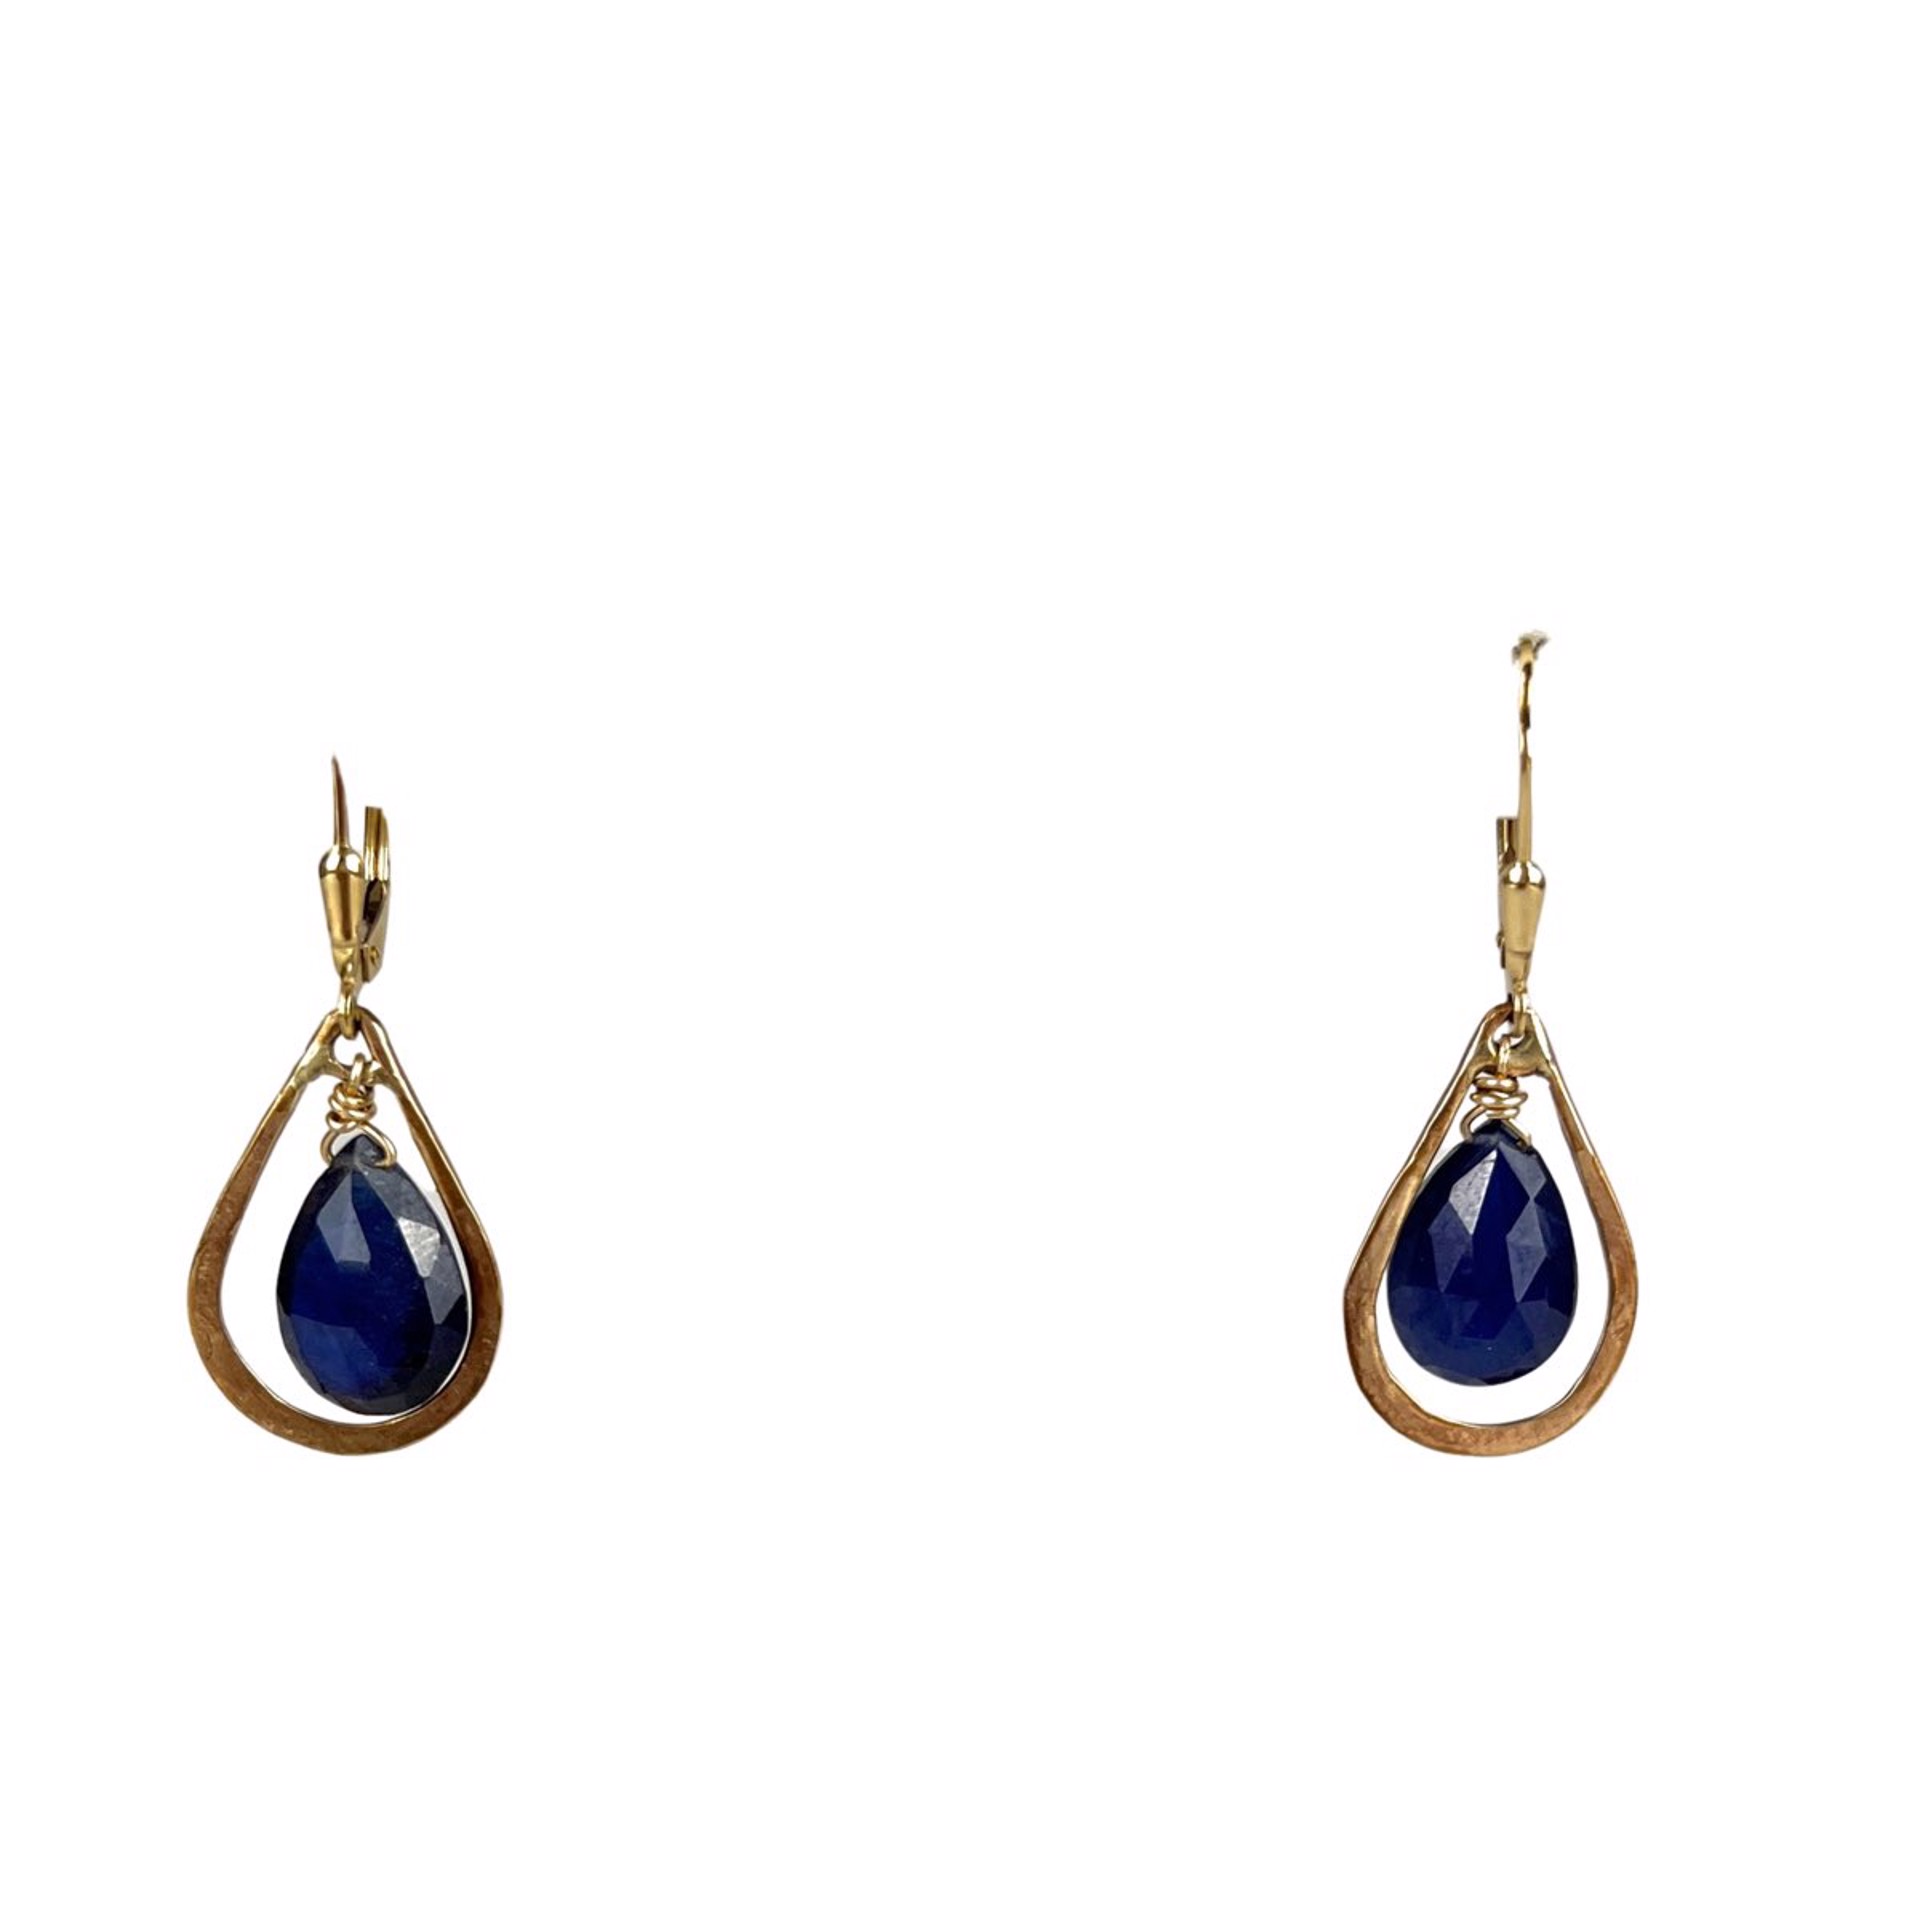 Blue Sapphire and 14KGF Teardrop Earrings by Nola Smodic